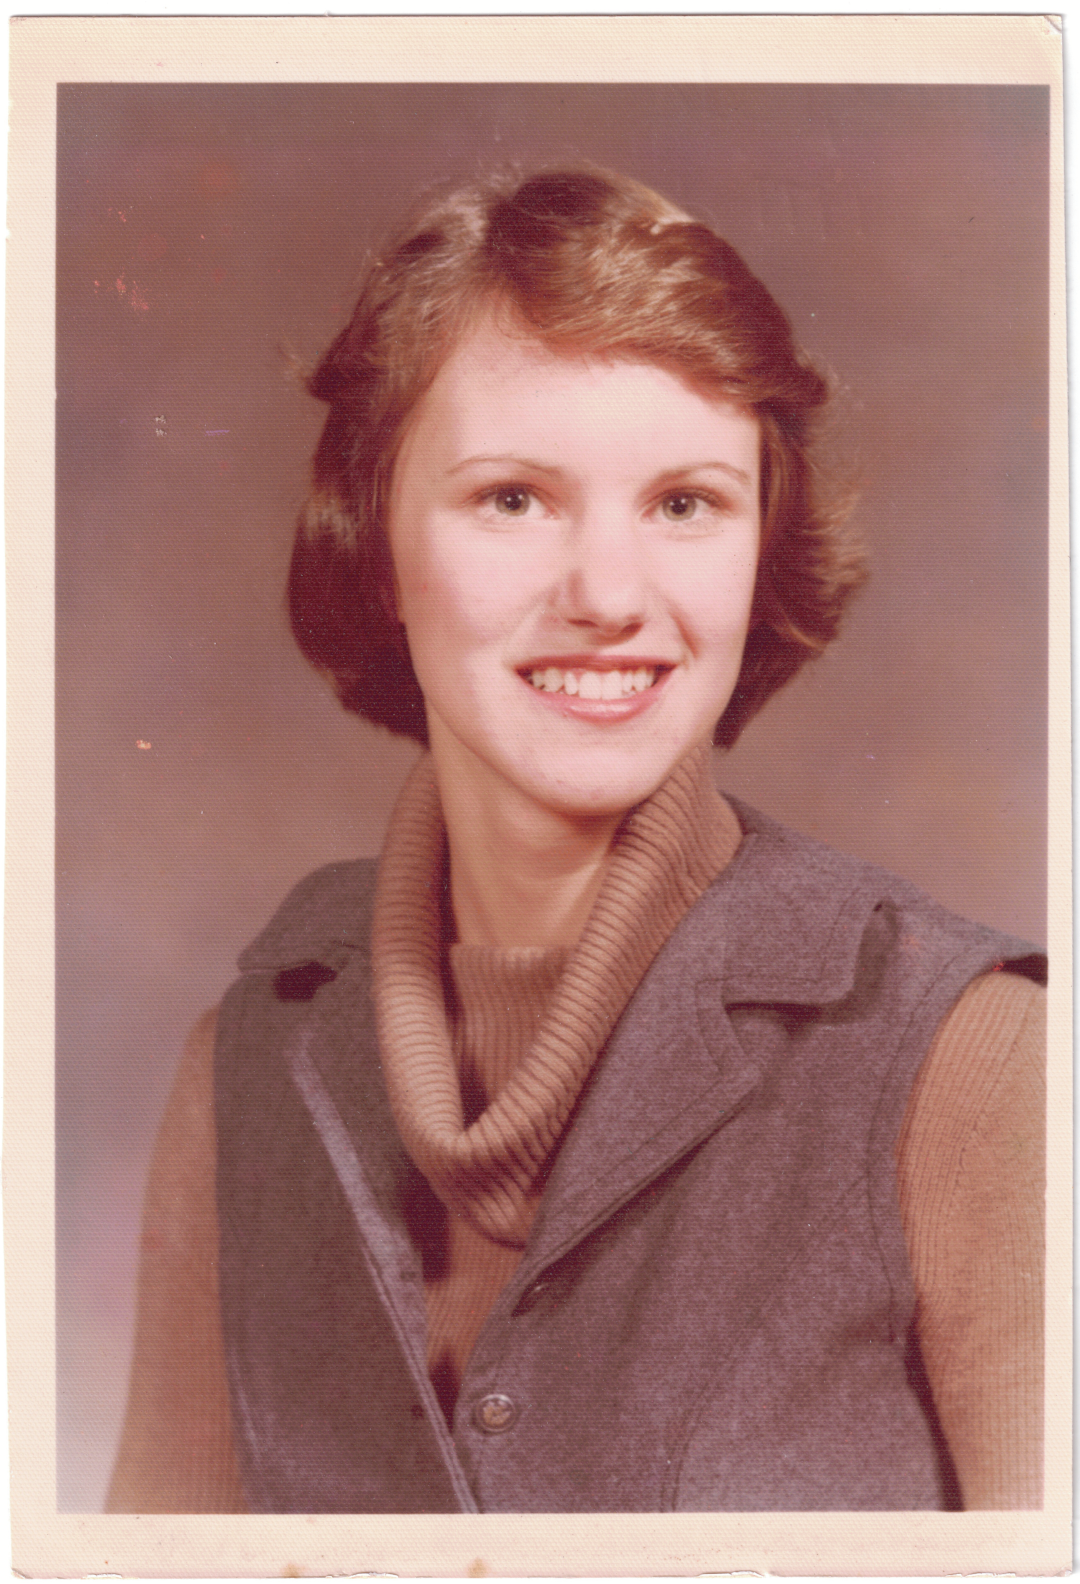 Kimberly Ann Miller posing for her 11th grade photo, wearing a sweater and vest she designed herself.